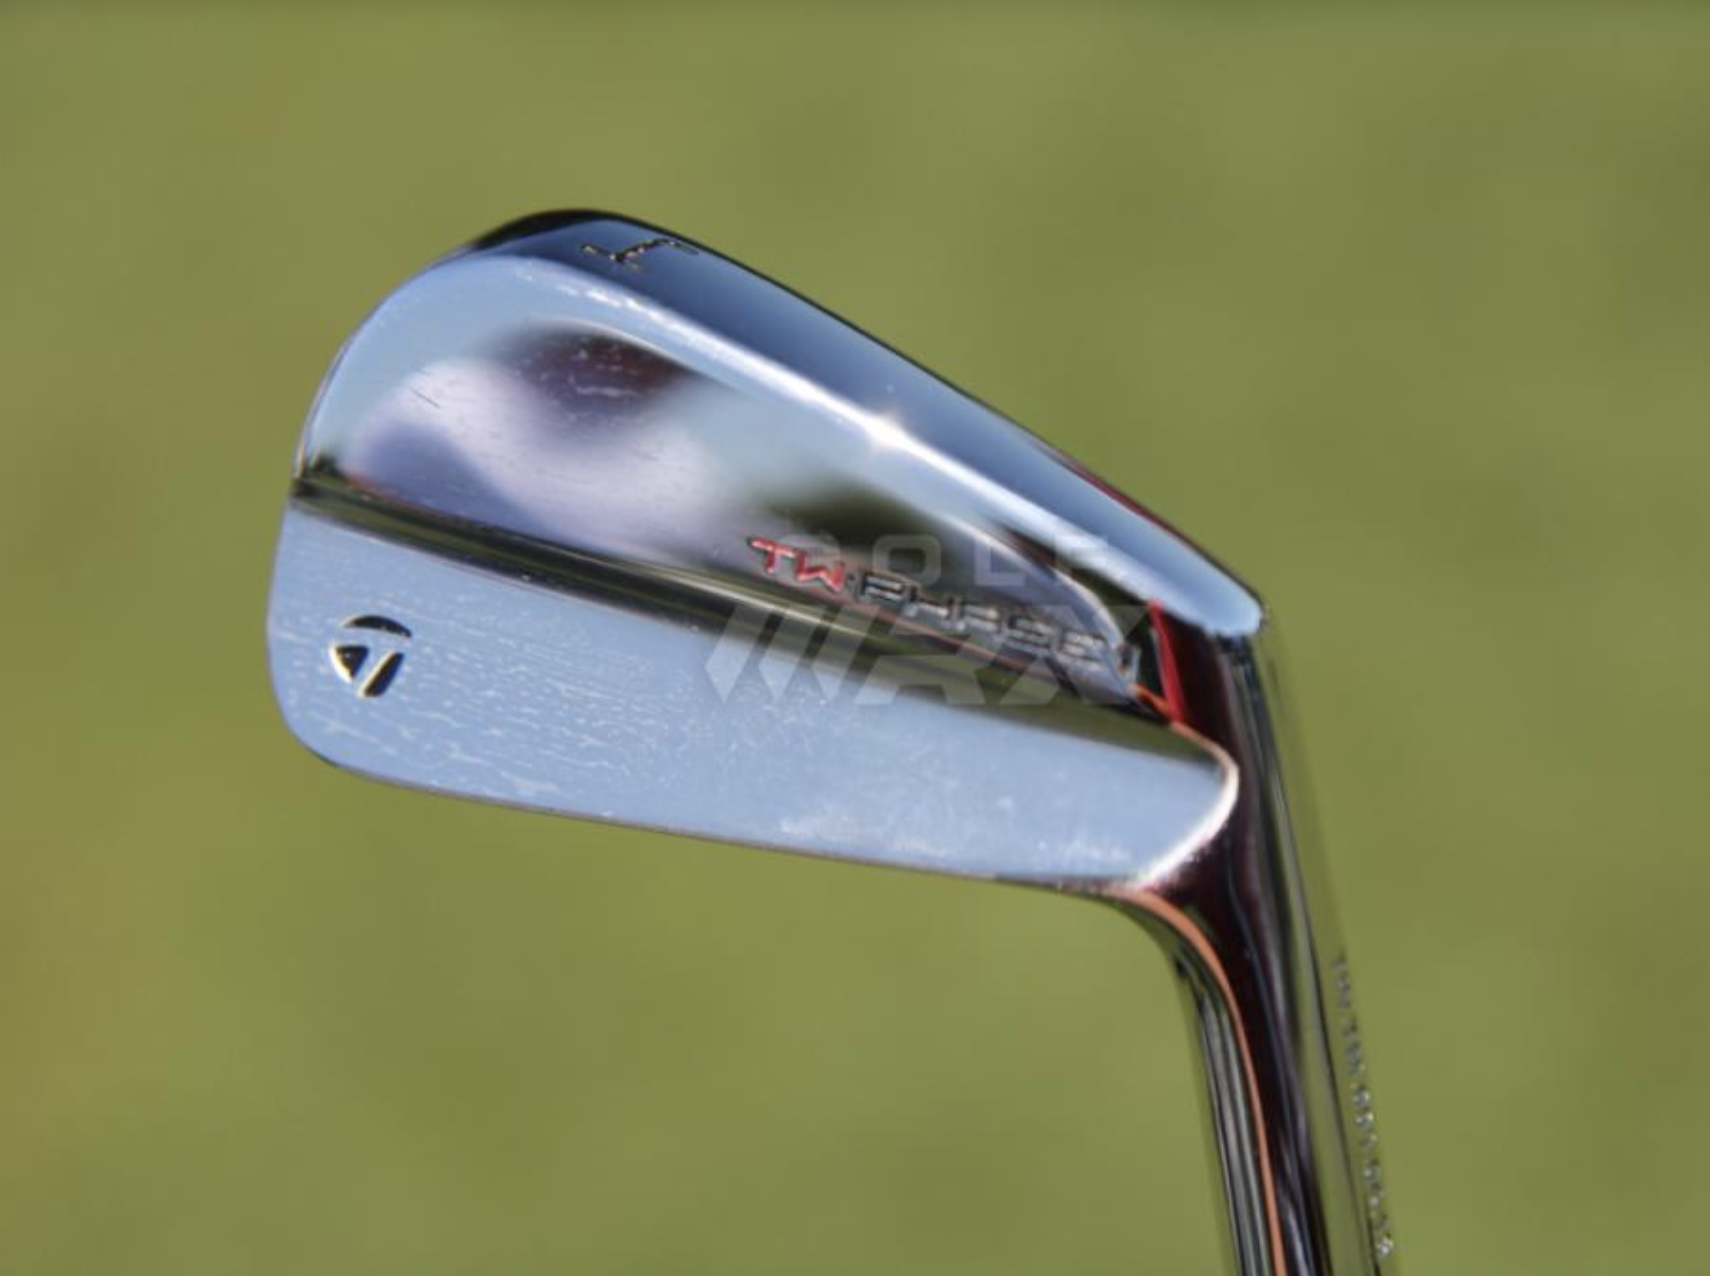 Standaard Mooie vrouw Schouderophalend Remembering the 2018 Wells Fargo and the Tiger Woods Phase 1 irons – GolfWRX